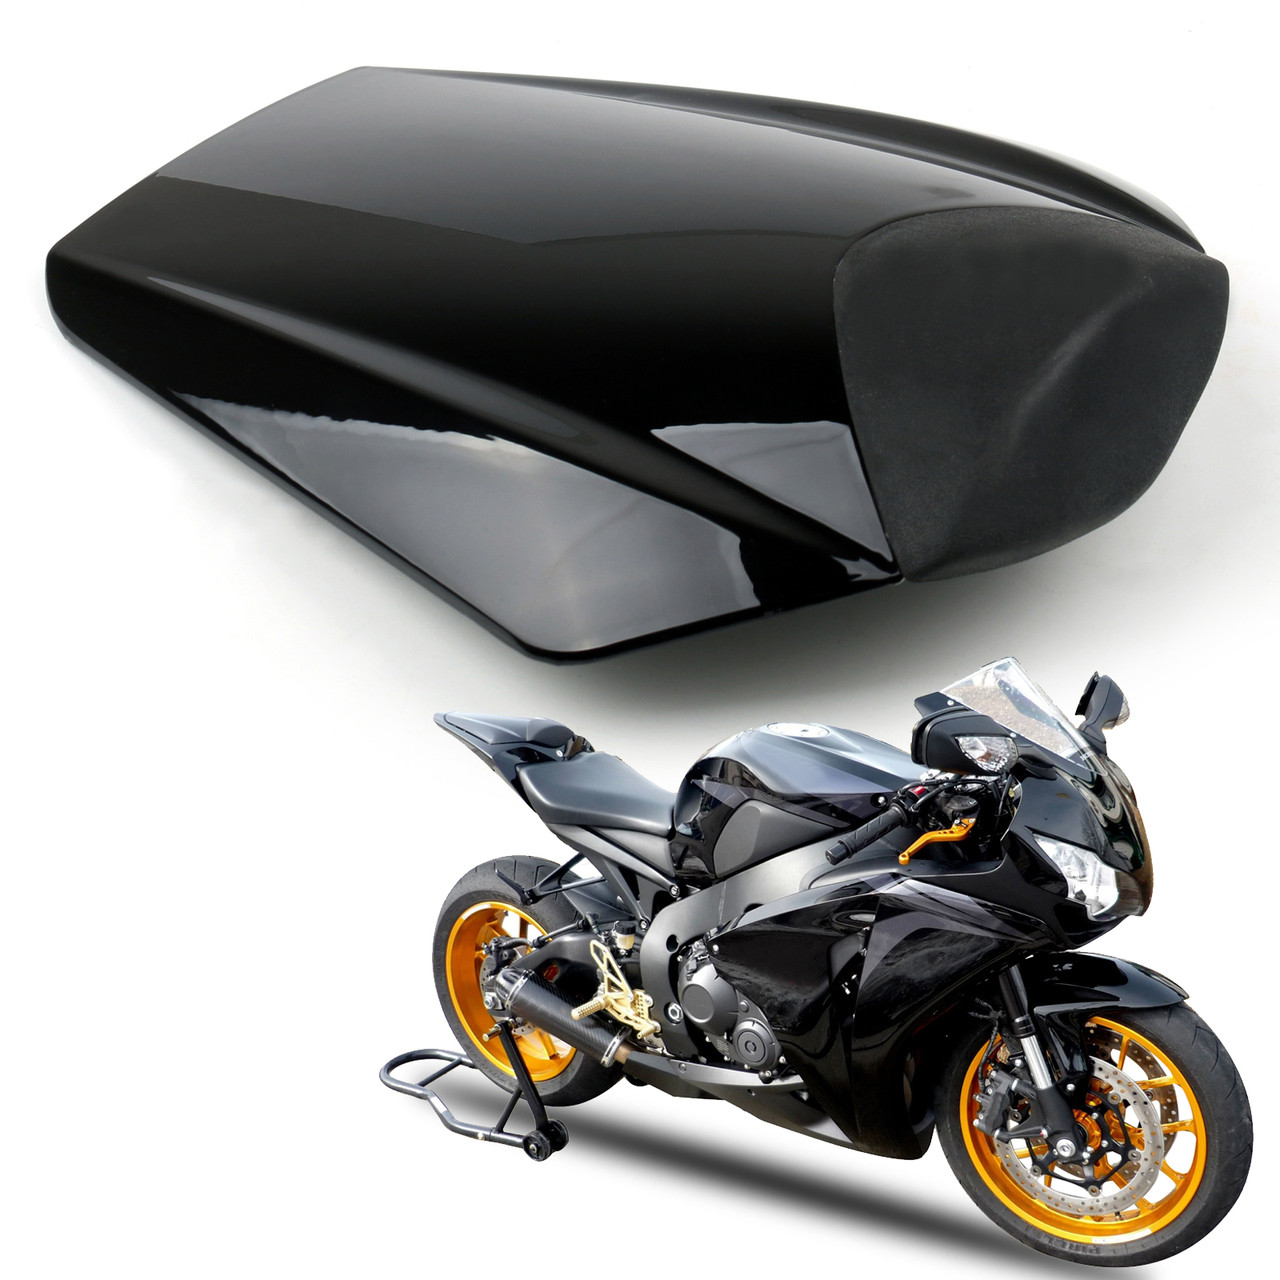 Three T Rear Pillion Passenger Cowl Cover Motorcycle Seat Back Fairing Tail Cover Fit for CBR1000RR 2008 2009 2010 2011 2012 2013 2014 2015 2016 REPSOL 